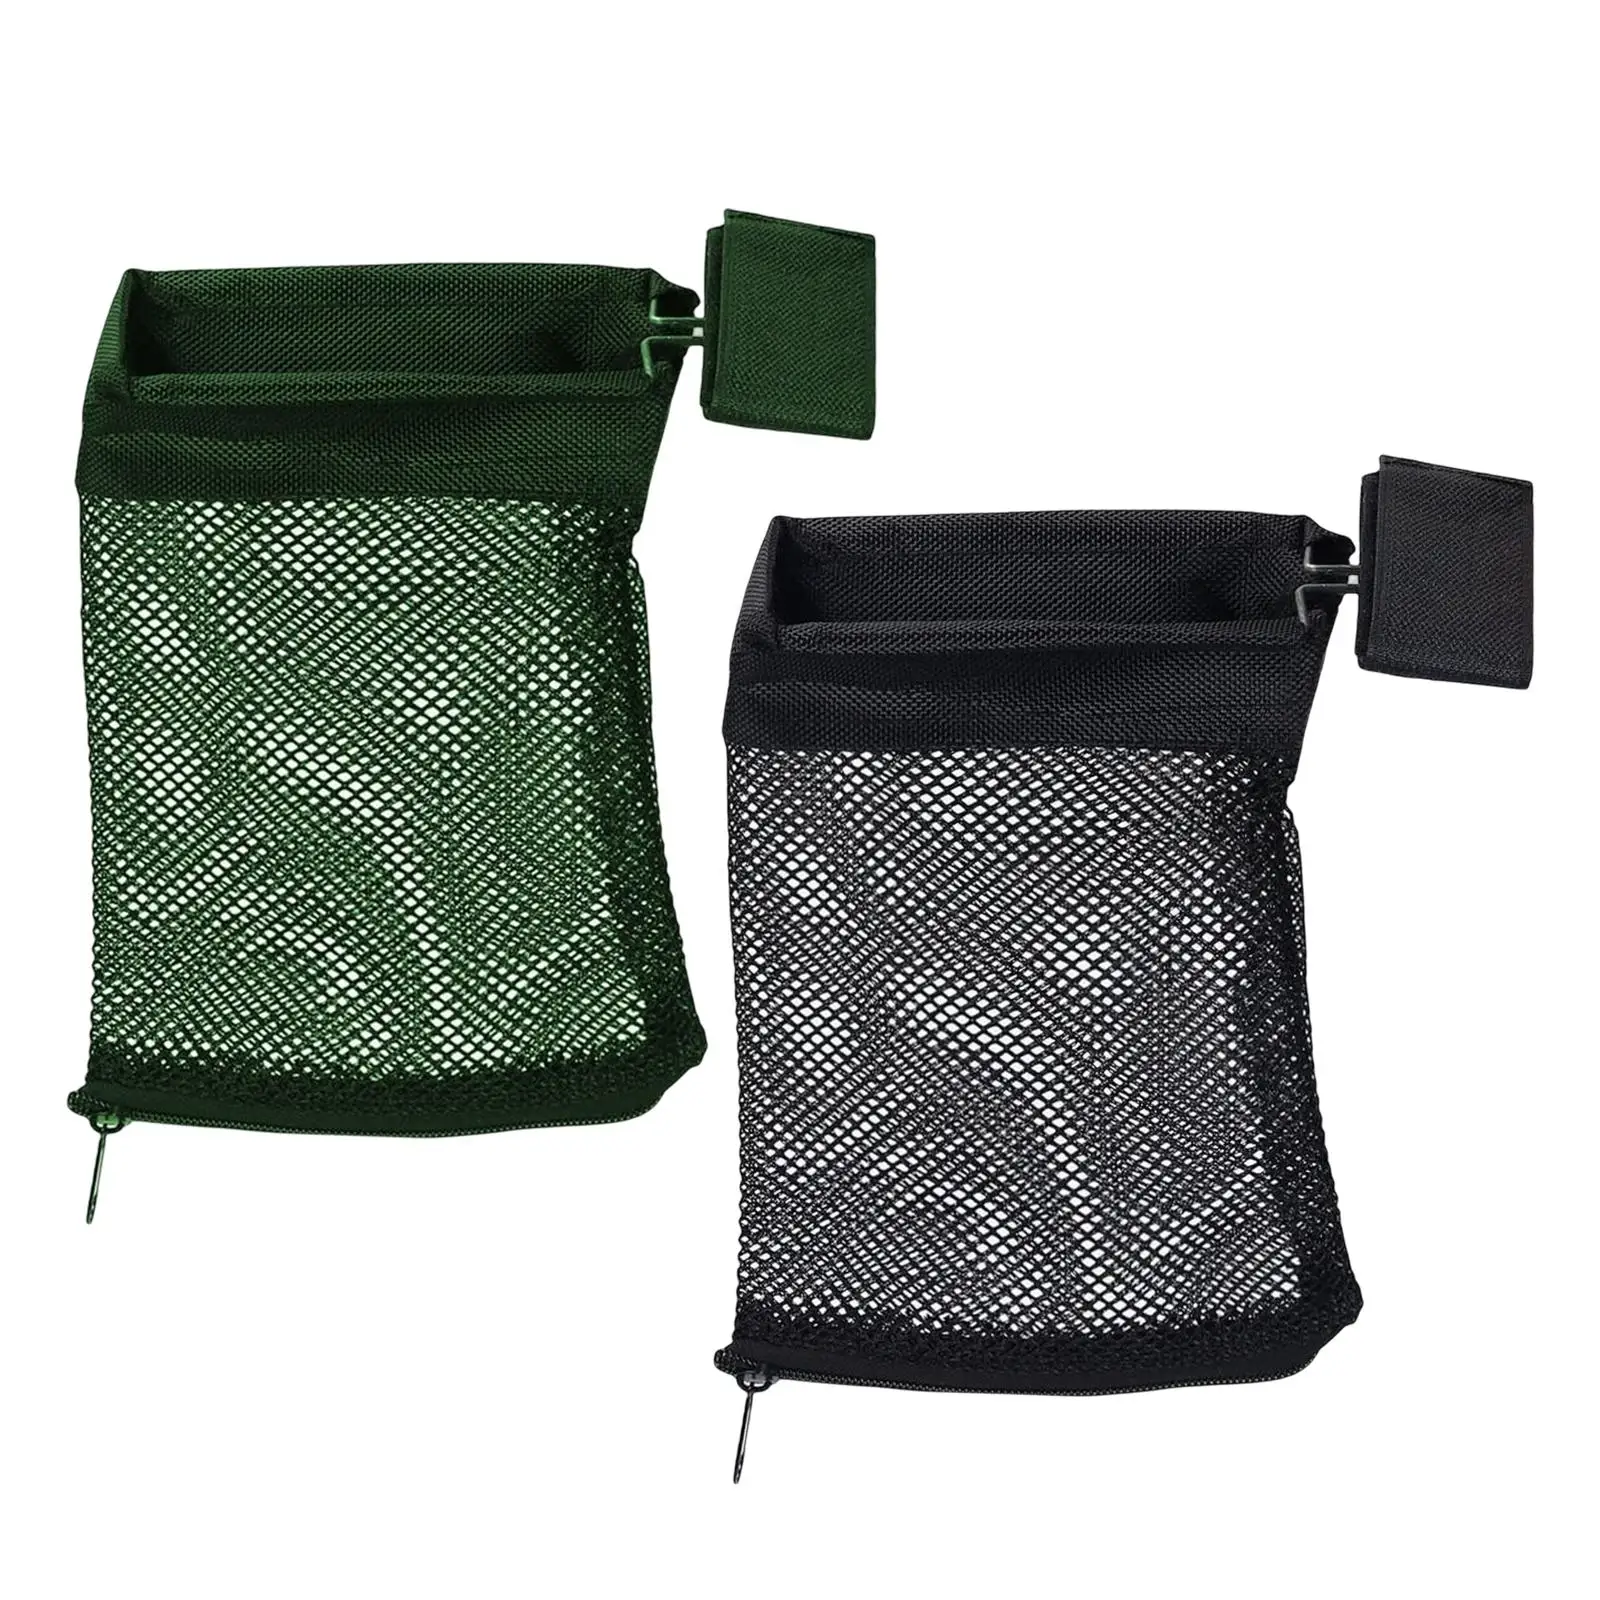 Net Recycling Bag Toiletry Pouch Collection With Zipper Organization Portable Storage Bag for Outdoor Office Hiking Home